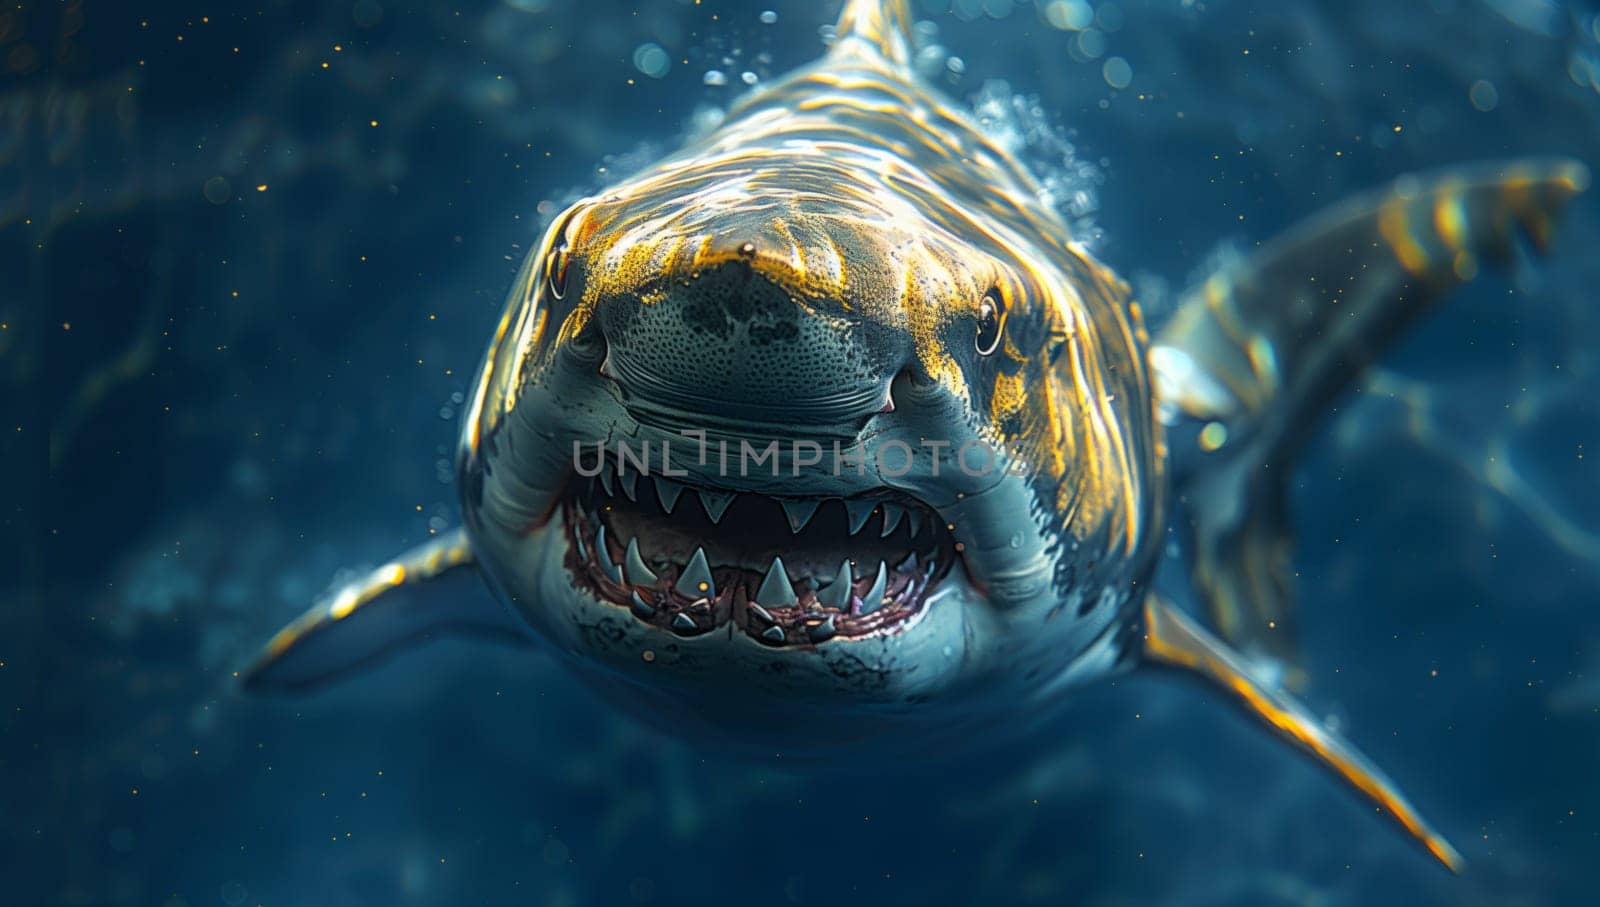 A white shark swims underwater with its jaws open in the liquid environment by richwolf